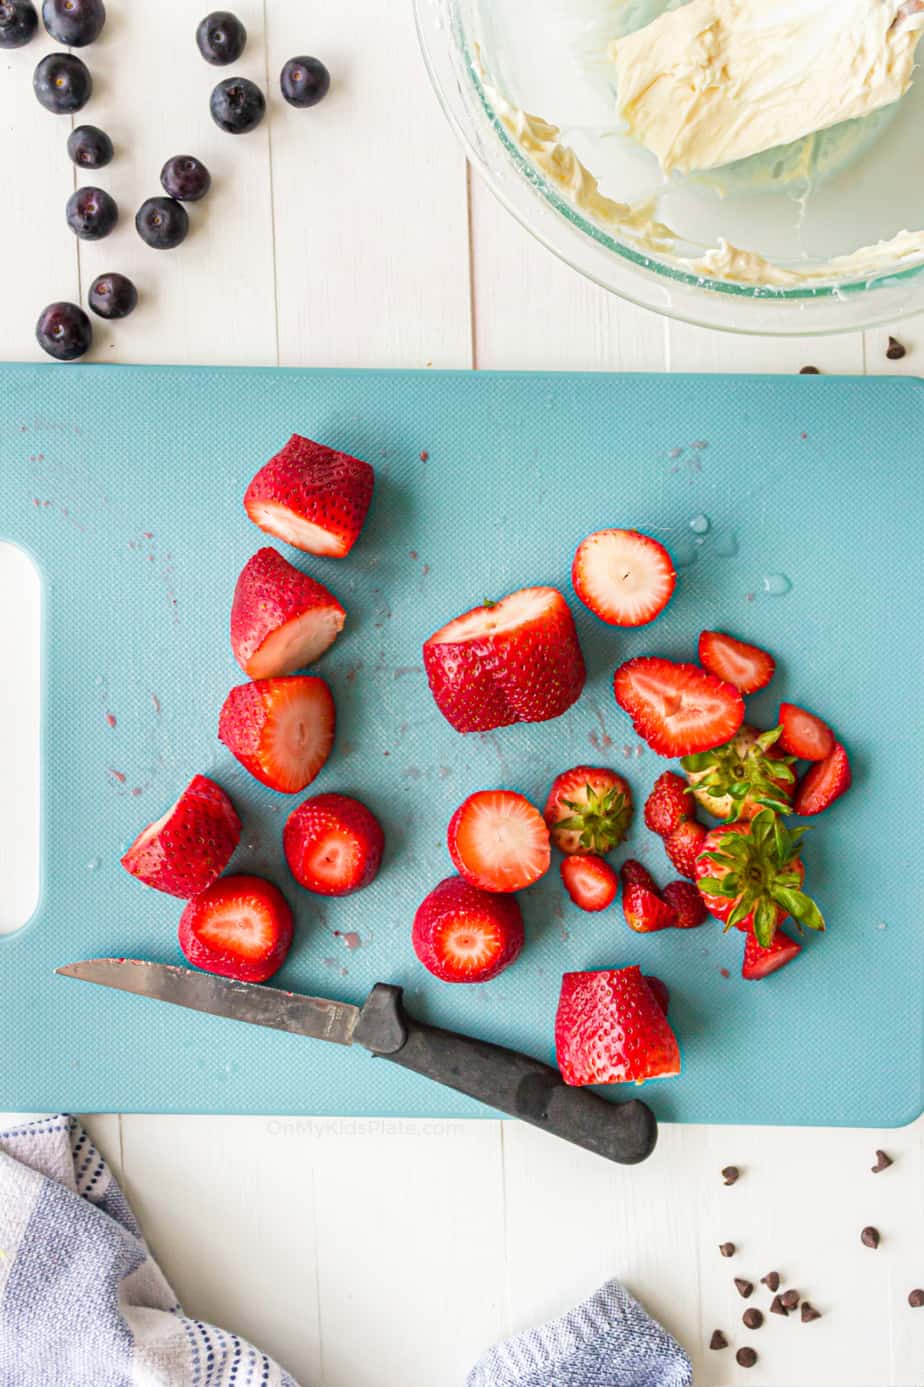 Strawberries with the tops and tips sliced off strewn across a cutting board with a small knife.